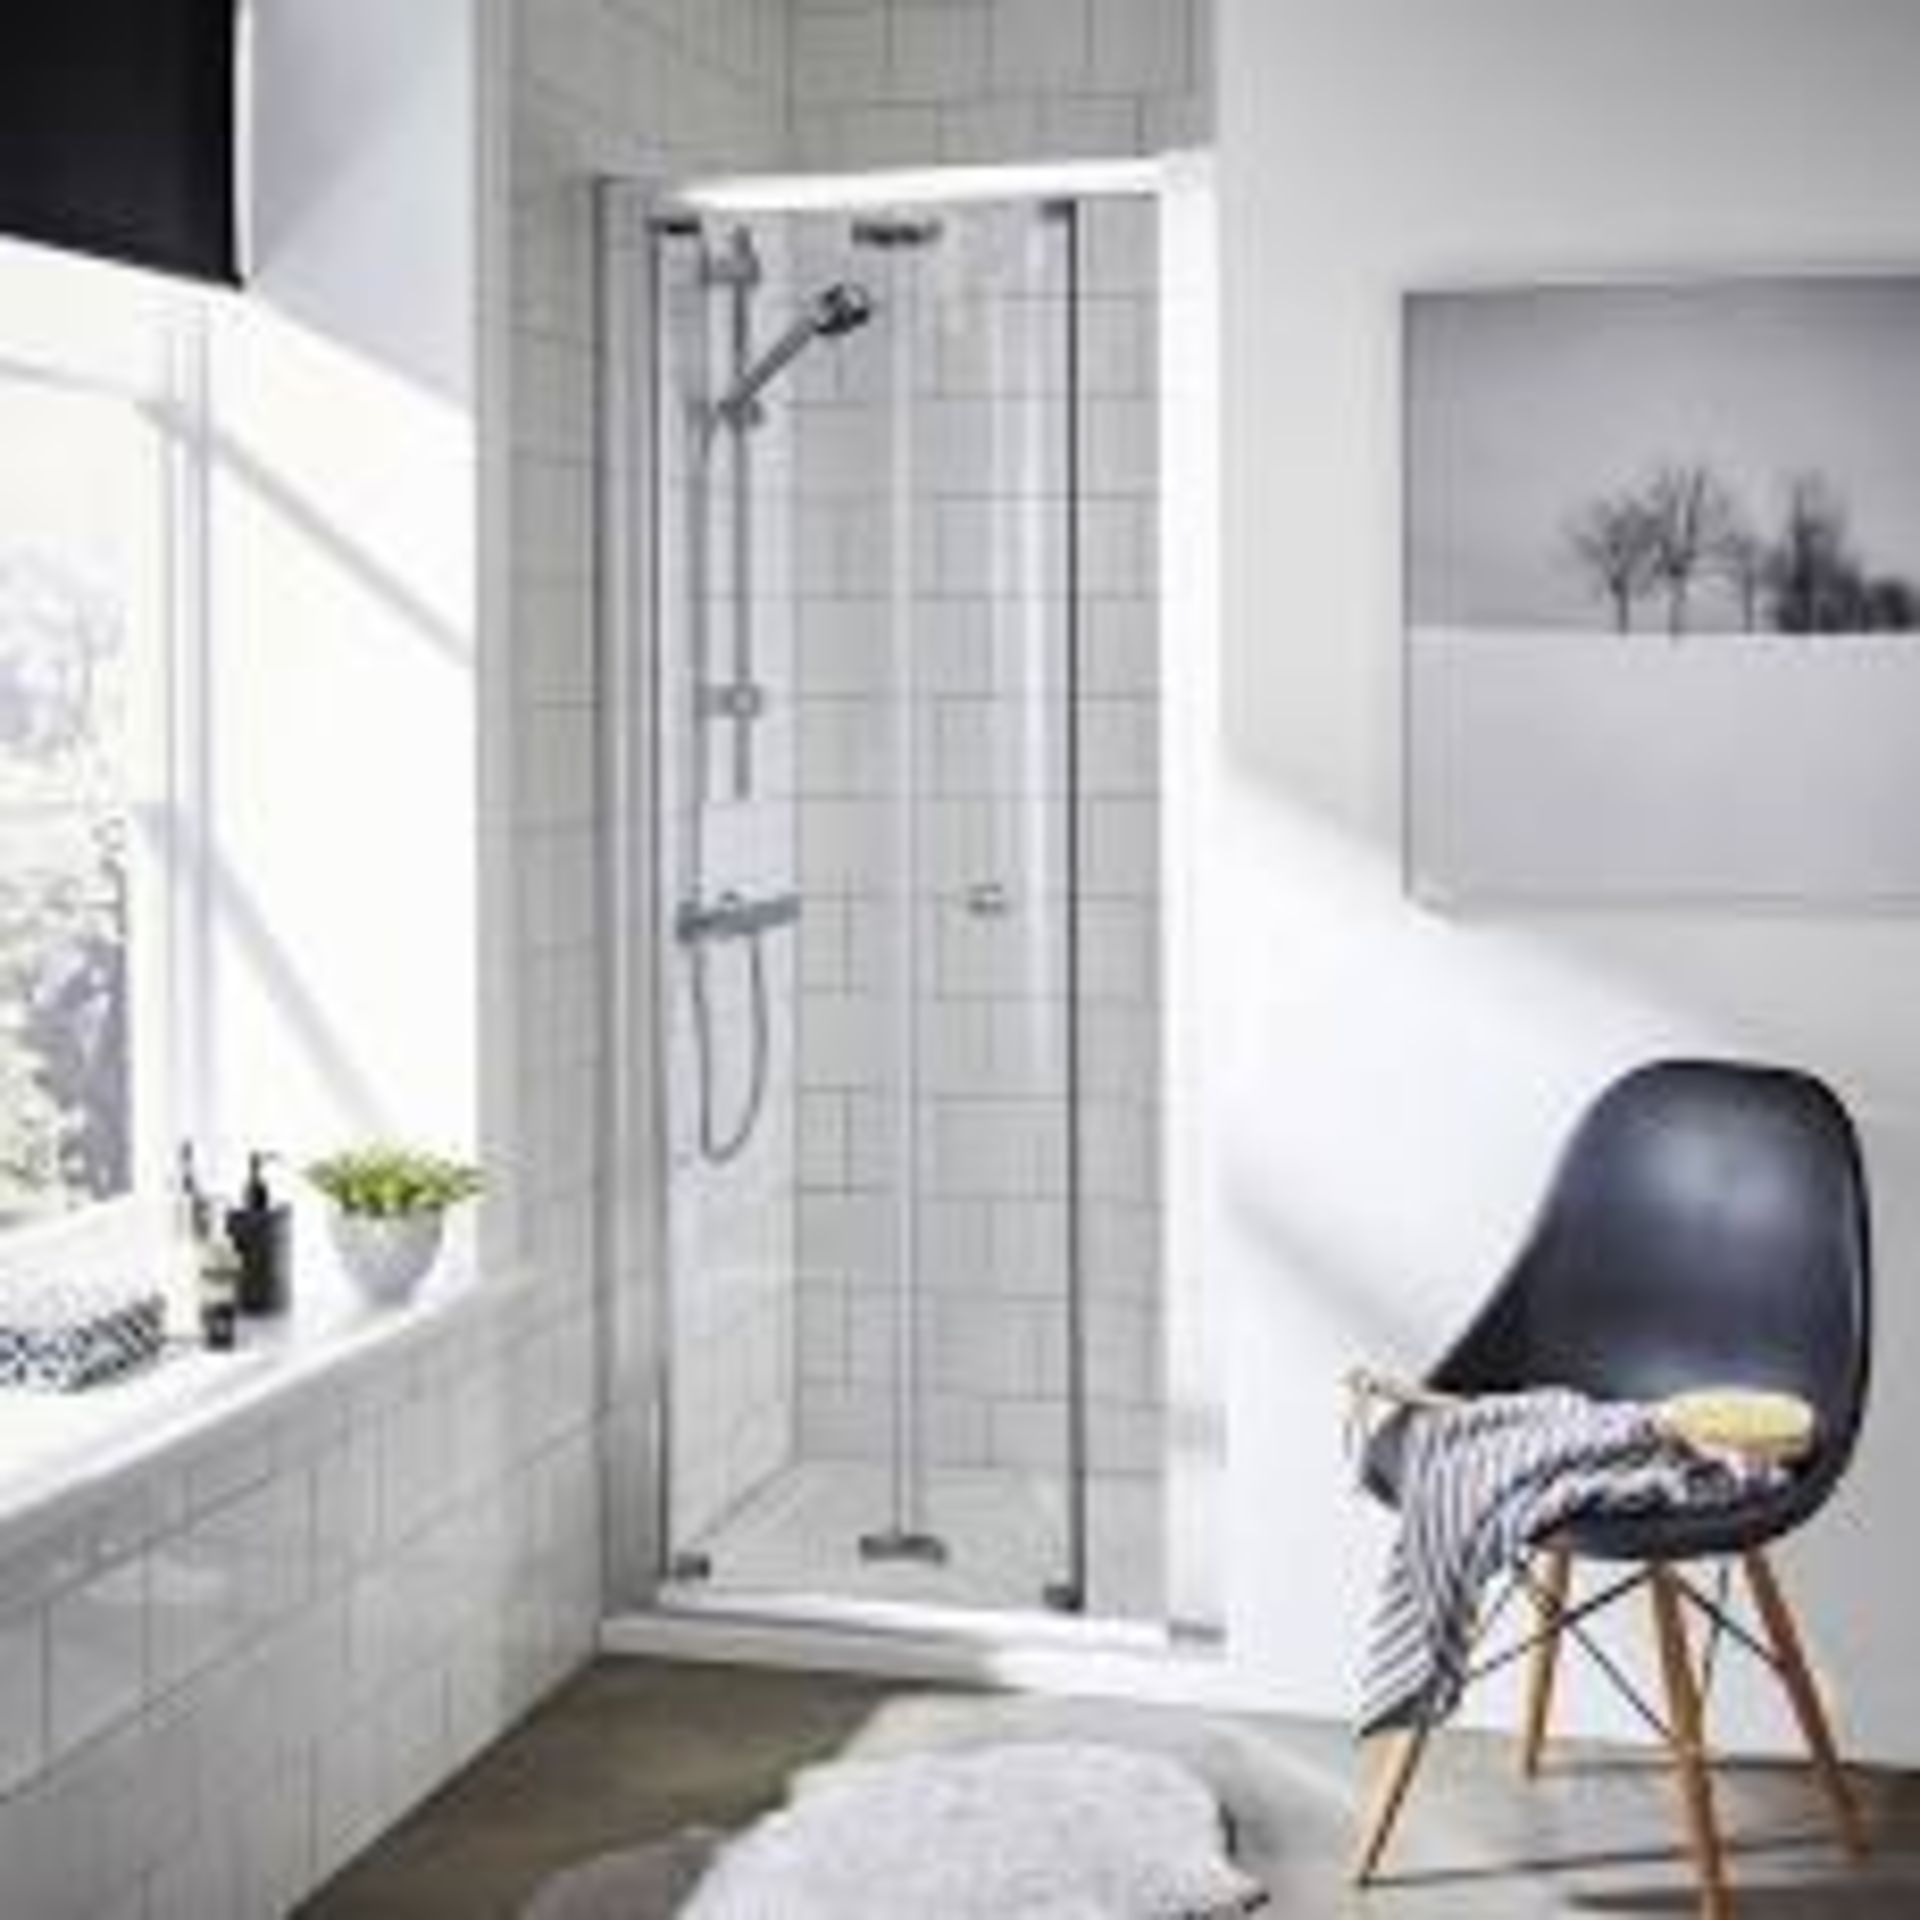 (RR115) 760mm White Shower door with Pivot door. RRP £299.99. With 5mm toughened glass, the sh...((